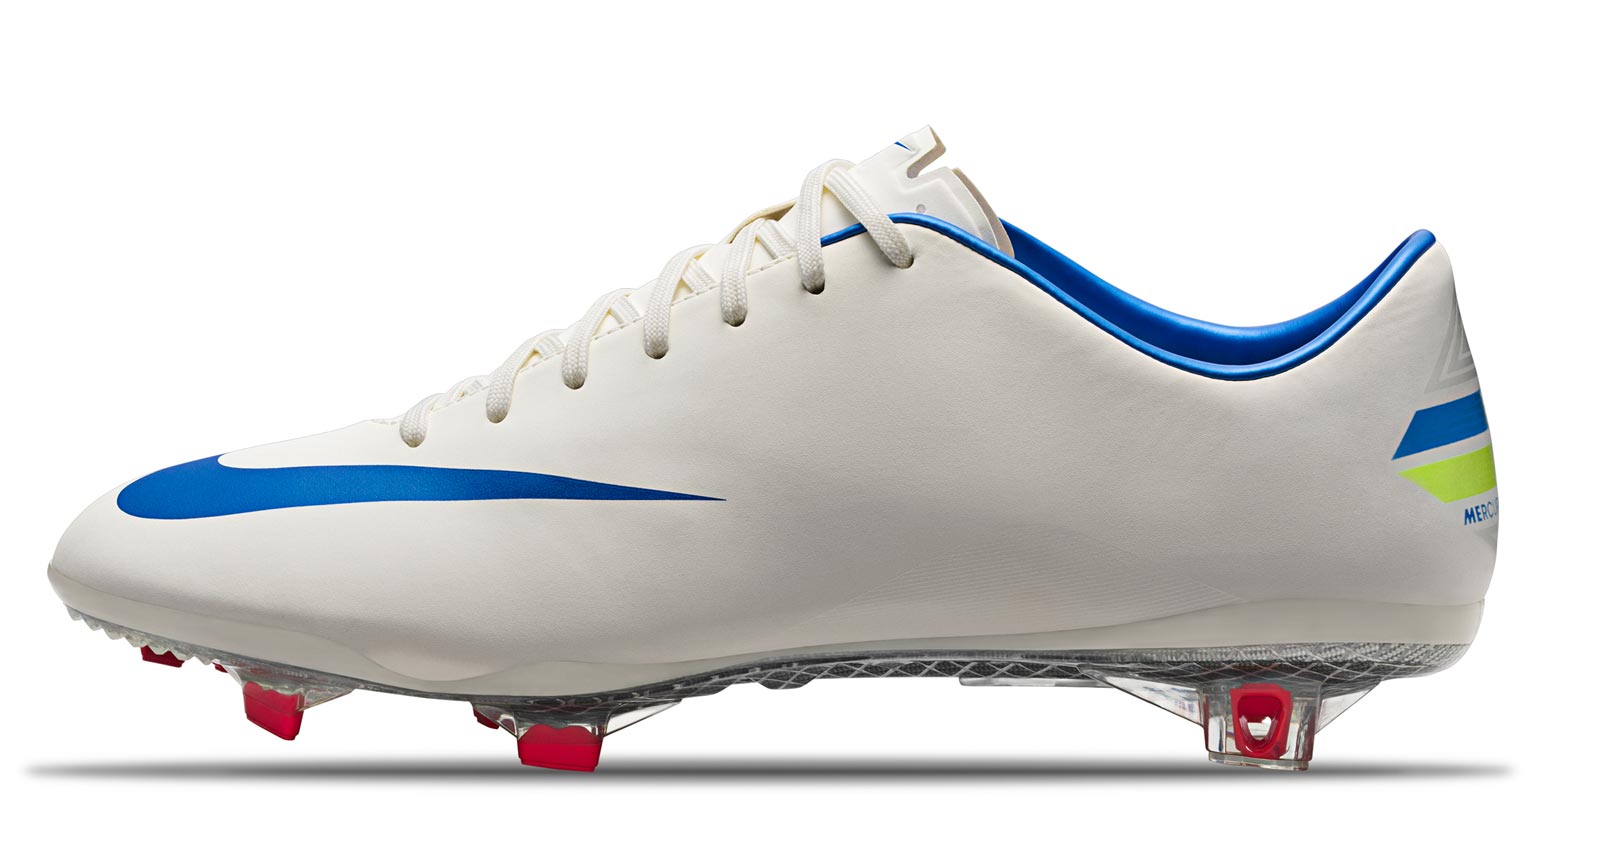 All Nike Mercurial Boots Worn By Cristiano Ronaldo Footy